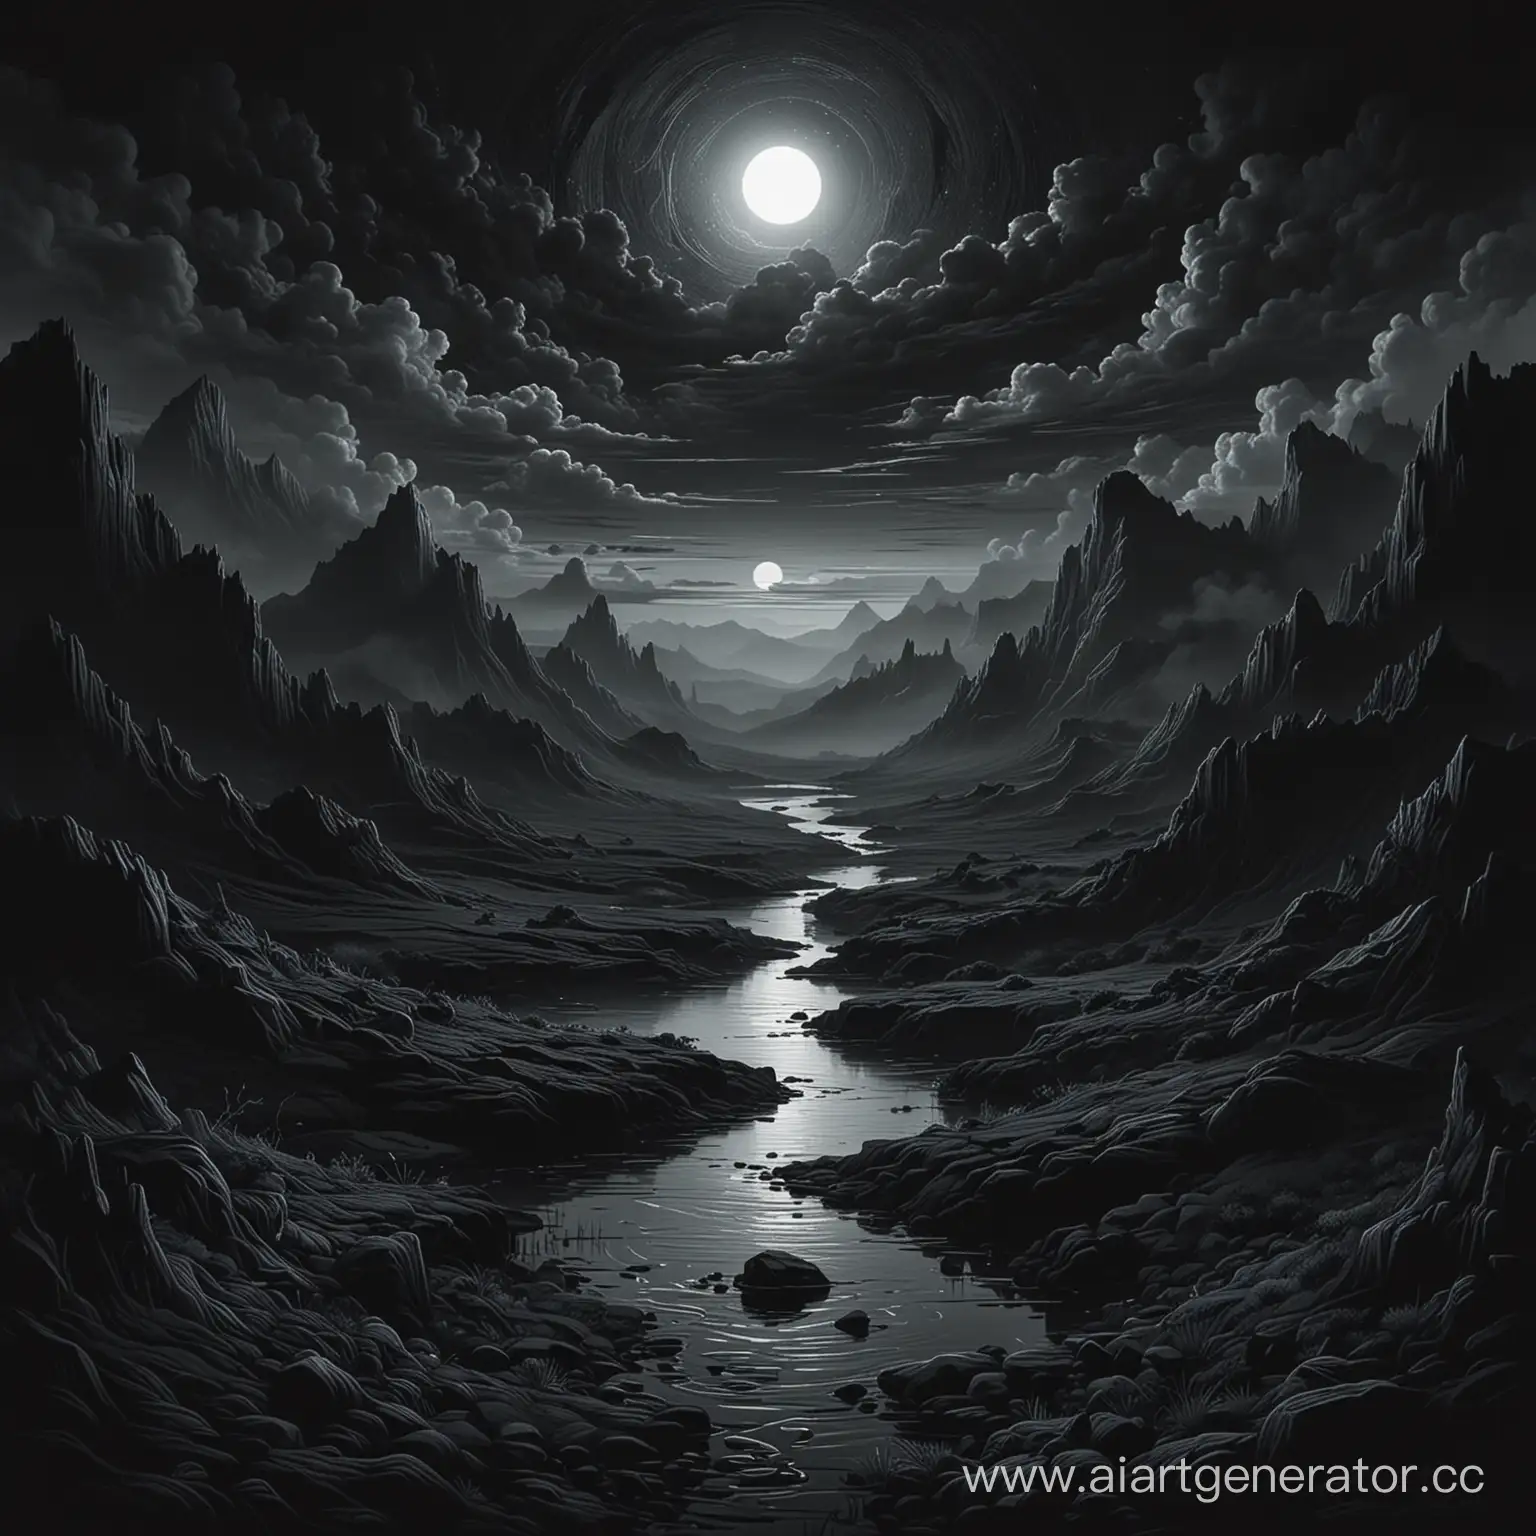 Mysterious-Dark-Landscape-Abstract-Symbolism-Art-Cover